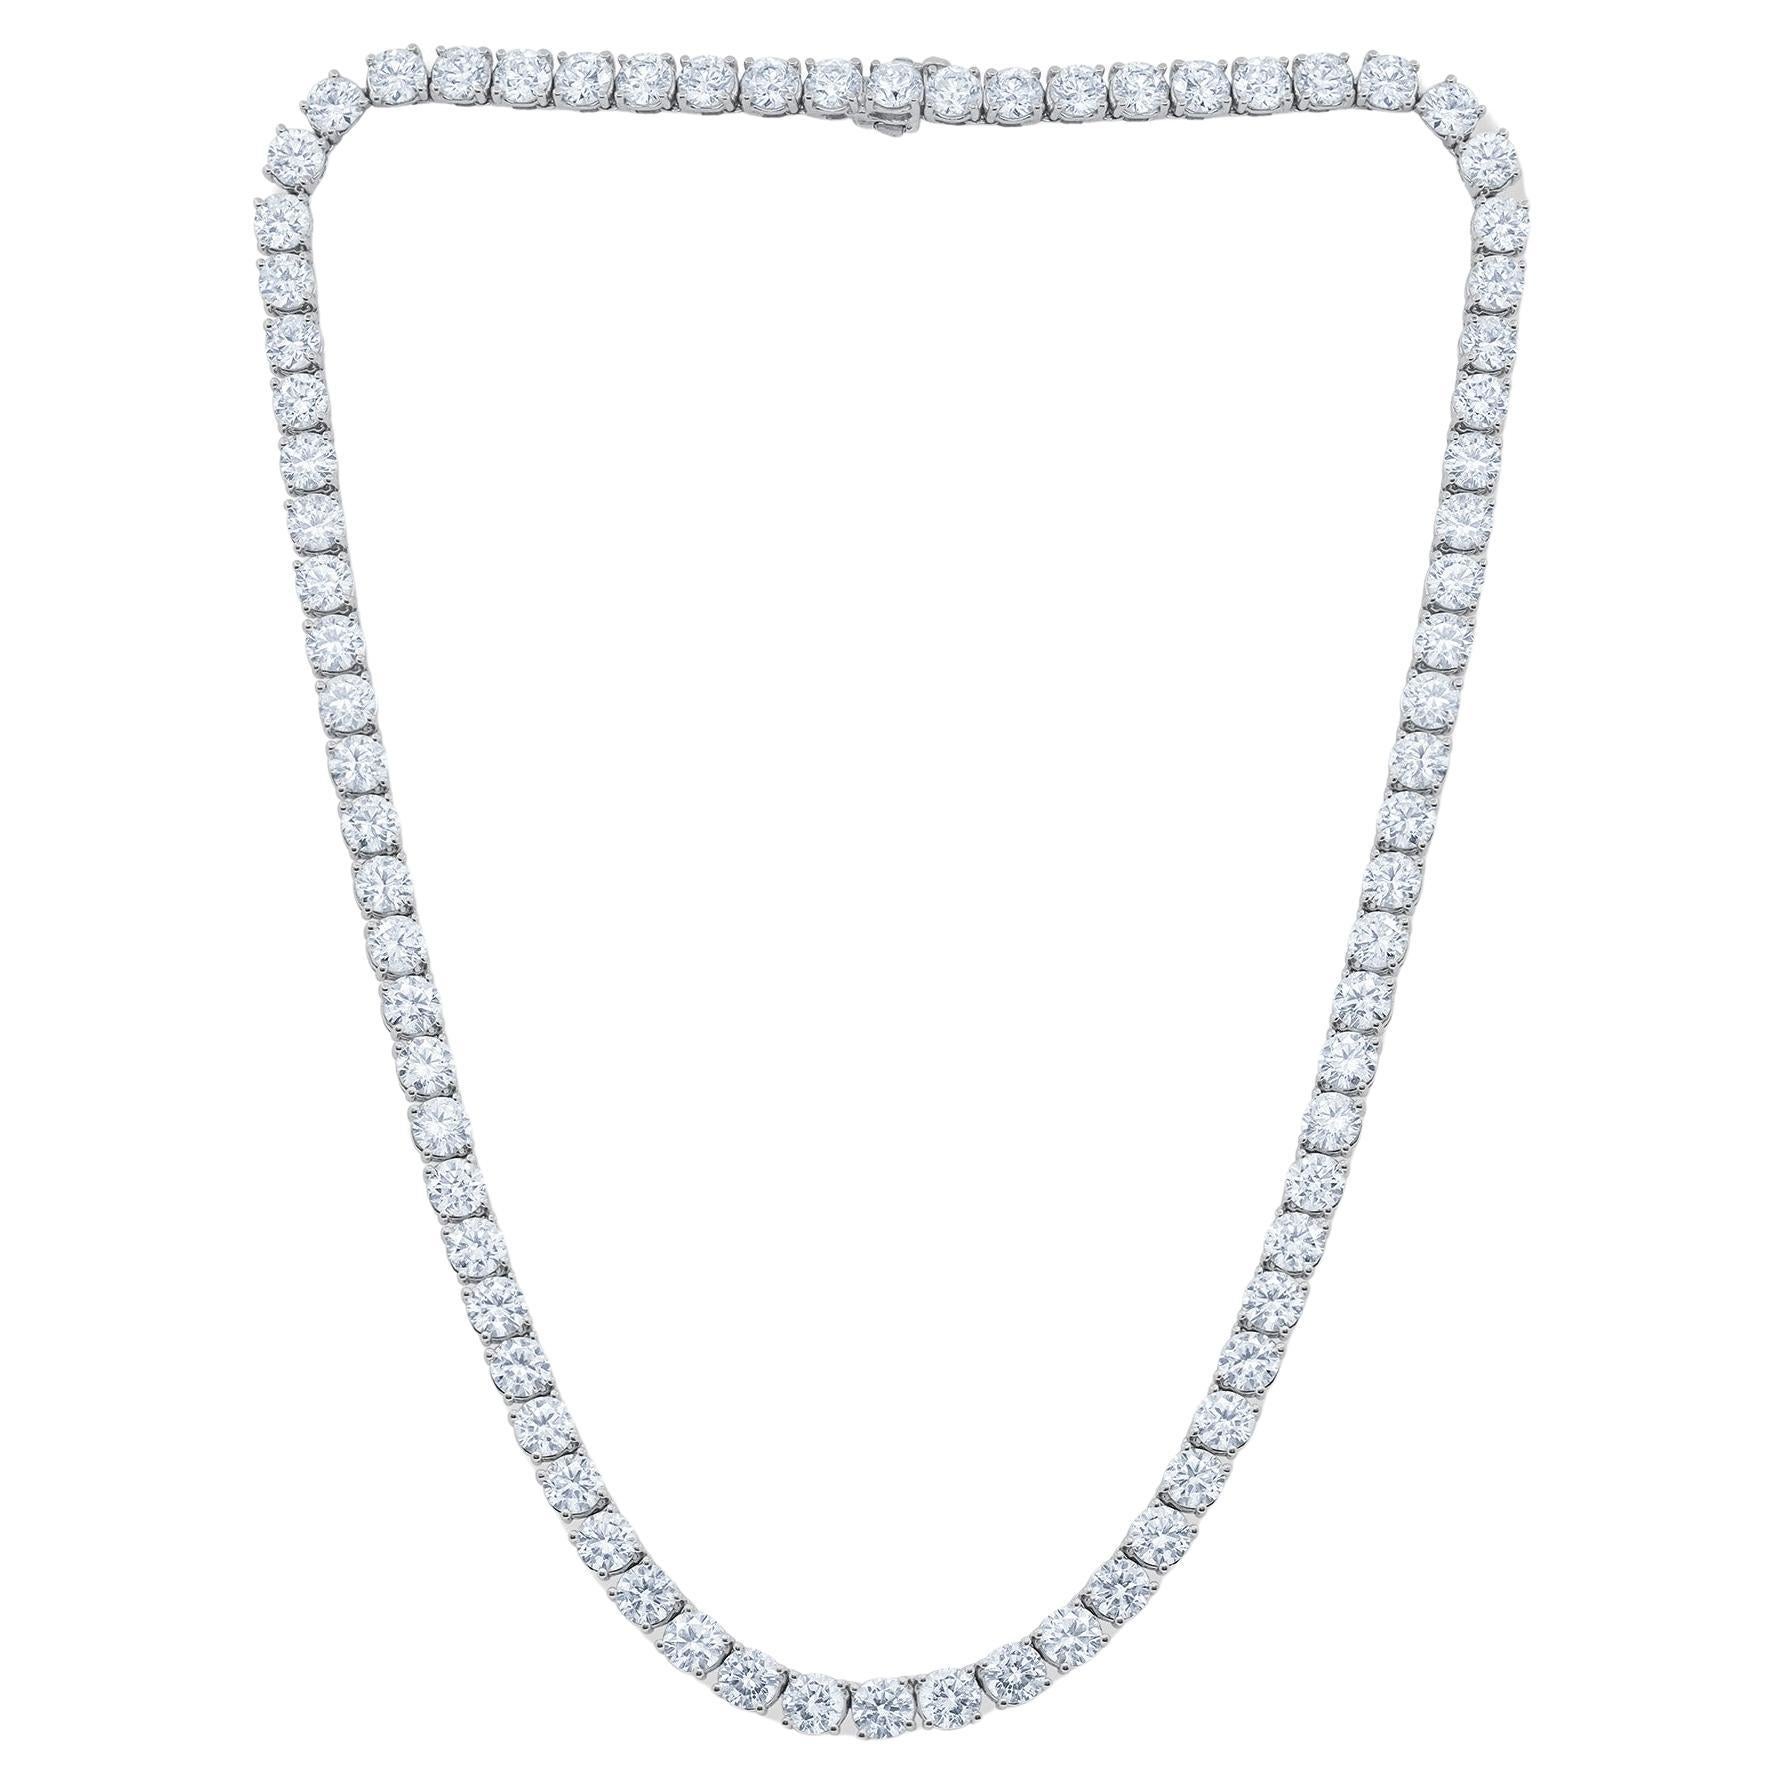 Diana M. Custom 37.50 cts round 4 prong diamond 18k white gold tennis necklace  For Sale